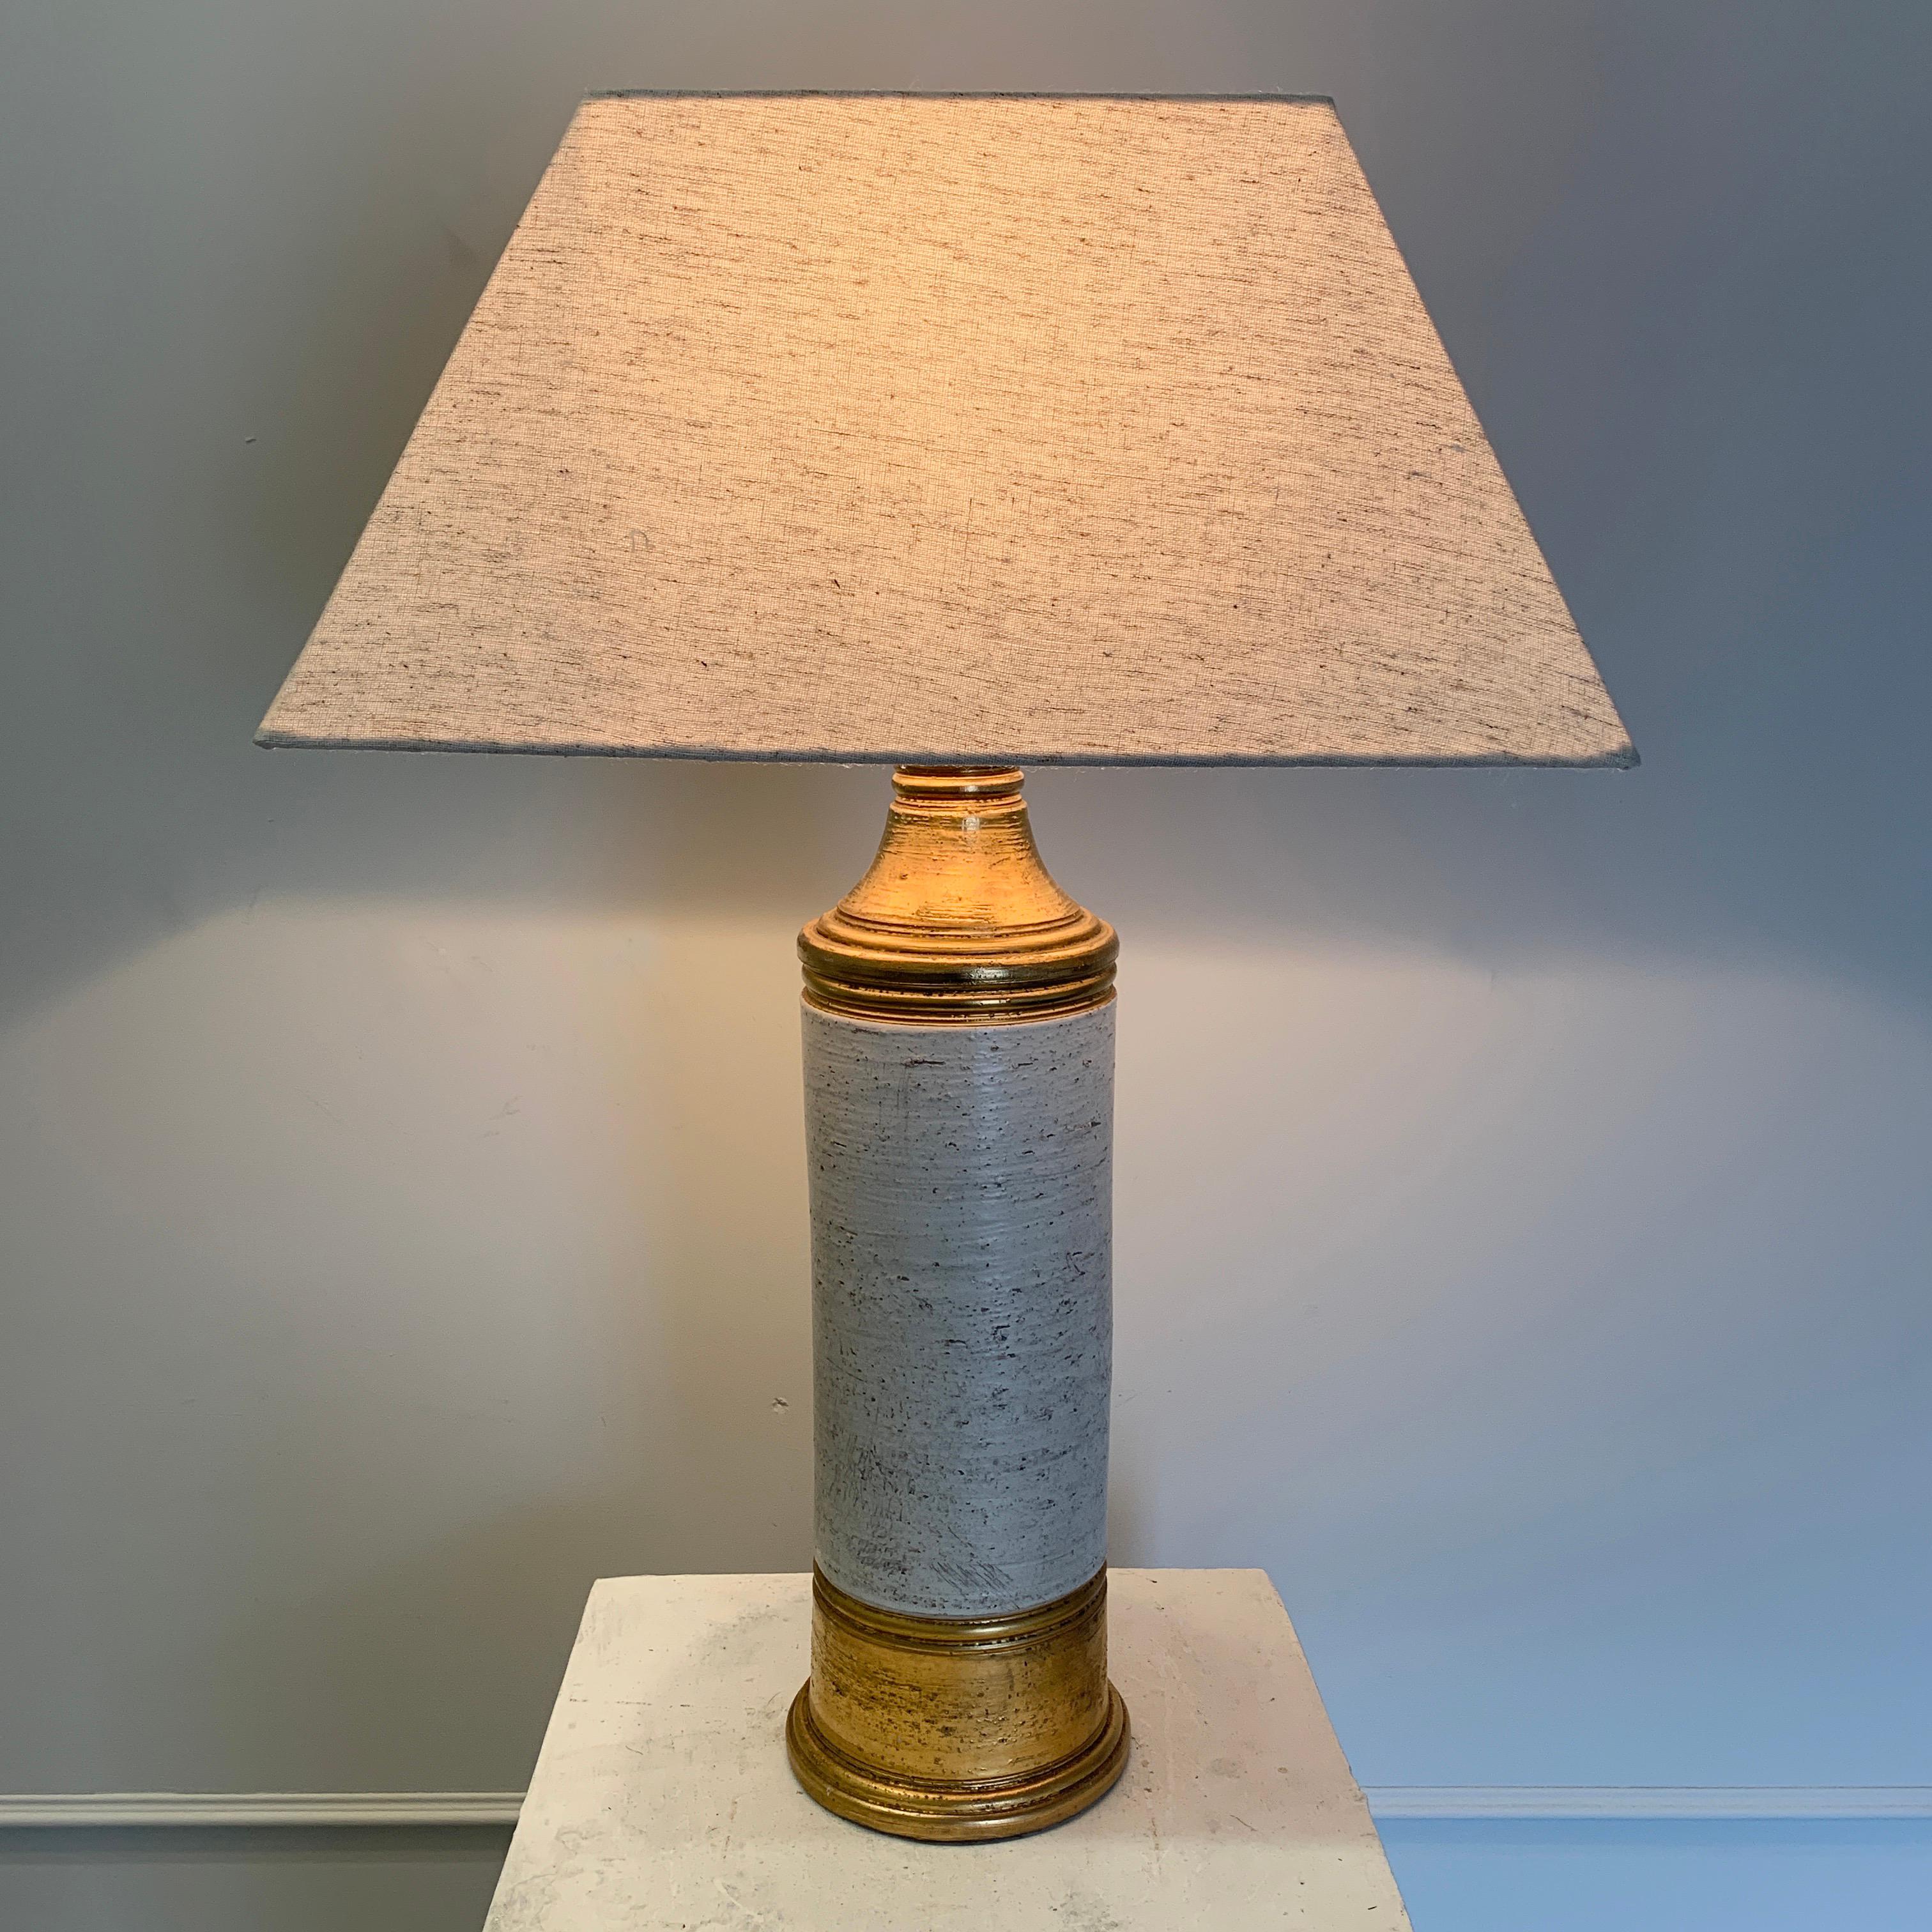 Vintage table lamp by Italian ceramics company Bitossi for Bergboms, Sweden, circa 1960s. 

The lamp has an off-white 